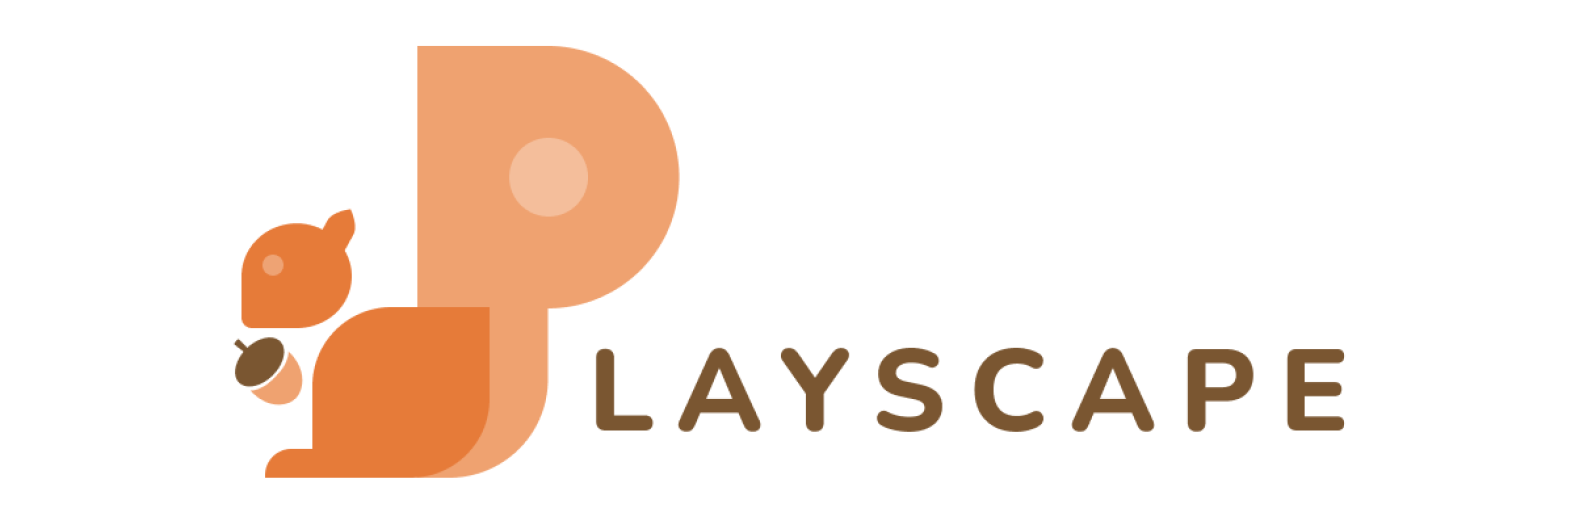 Playscape banner depicting the Playscape logo at full width alongside the name